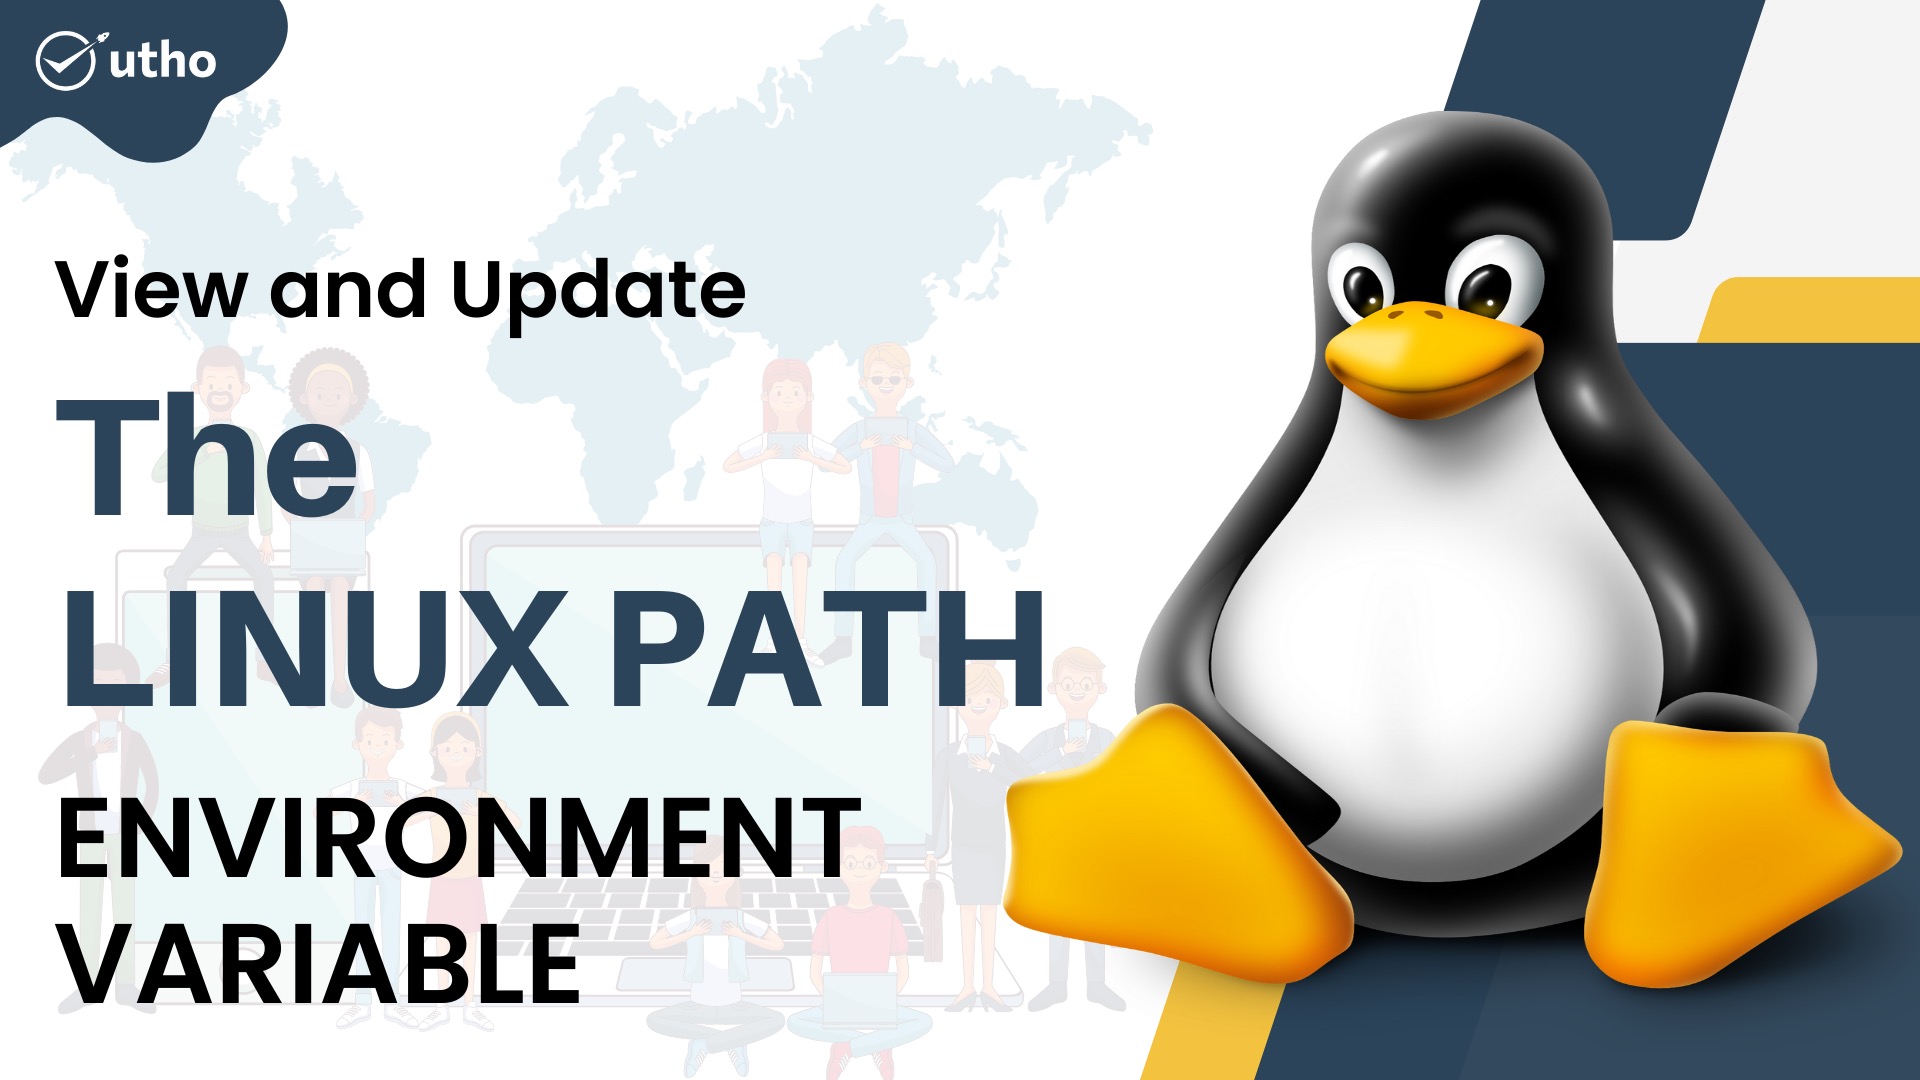 How To View and Update the Linux PATH Environment Variable